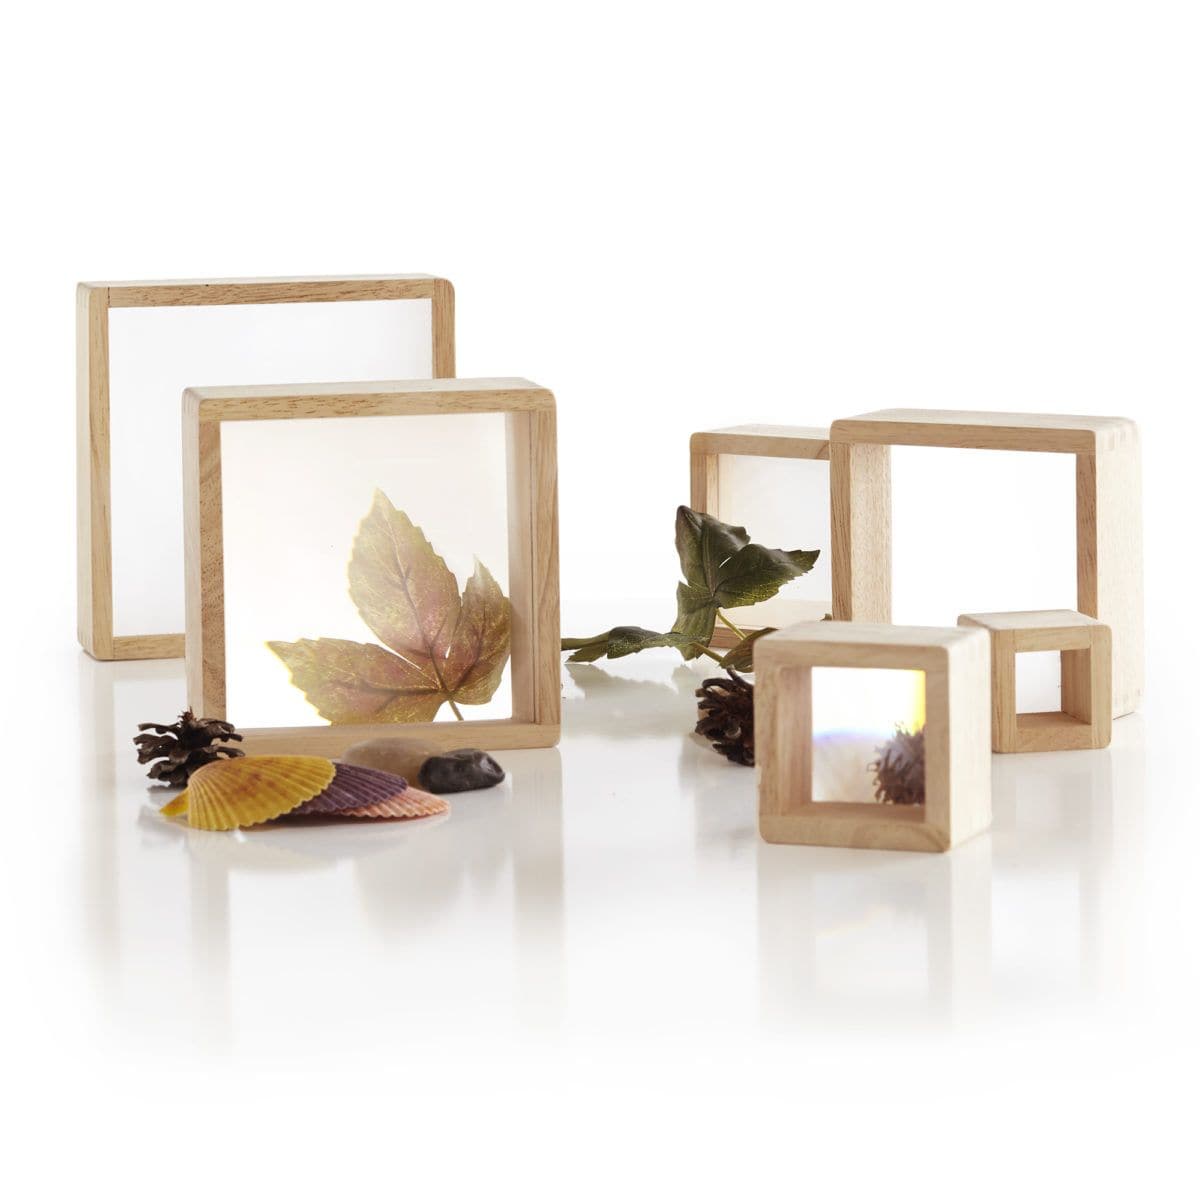 Guidecraft Magnification Blocks, The Guidecraft Magnification Blocks come with Six stacking squares which feature hardwood frames, and smooth, rounded corners and edges, with inset magnified acrylic windows. The Guidecraft Magnification Blocks are Ideal for exploring natural, tactile, and other detailed materials found inside or in nature. Enhance STEM-based activities with the 6-piece set, perfect for group play. Largest square measures 7”W x 7”D x 2”H. Hardwood block set with inset lenticular windows Set 